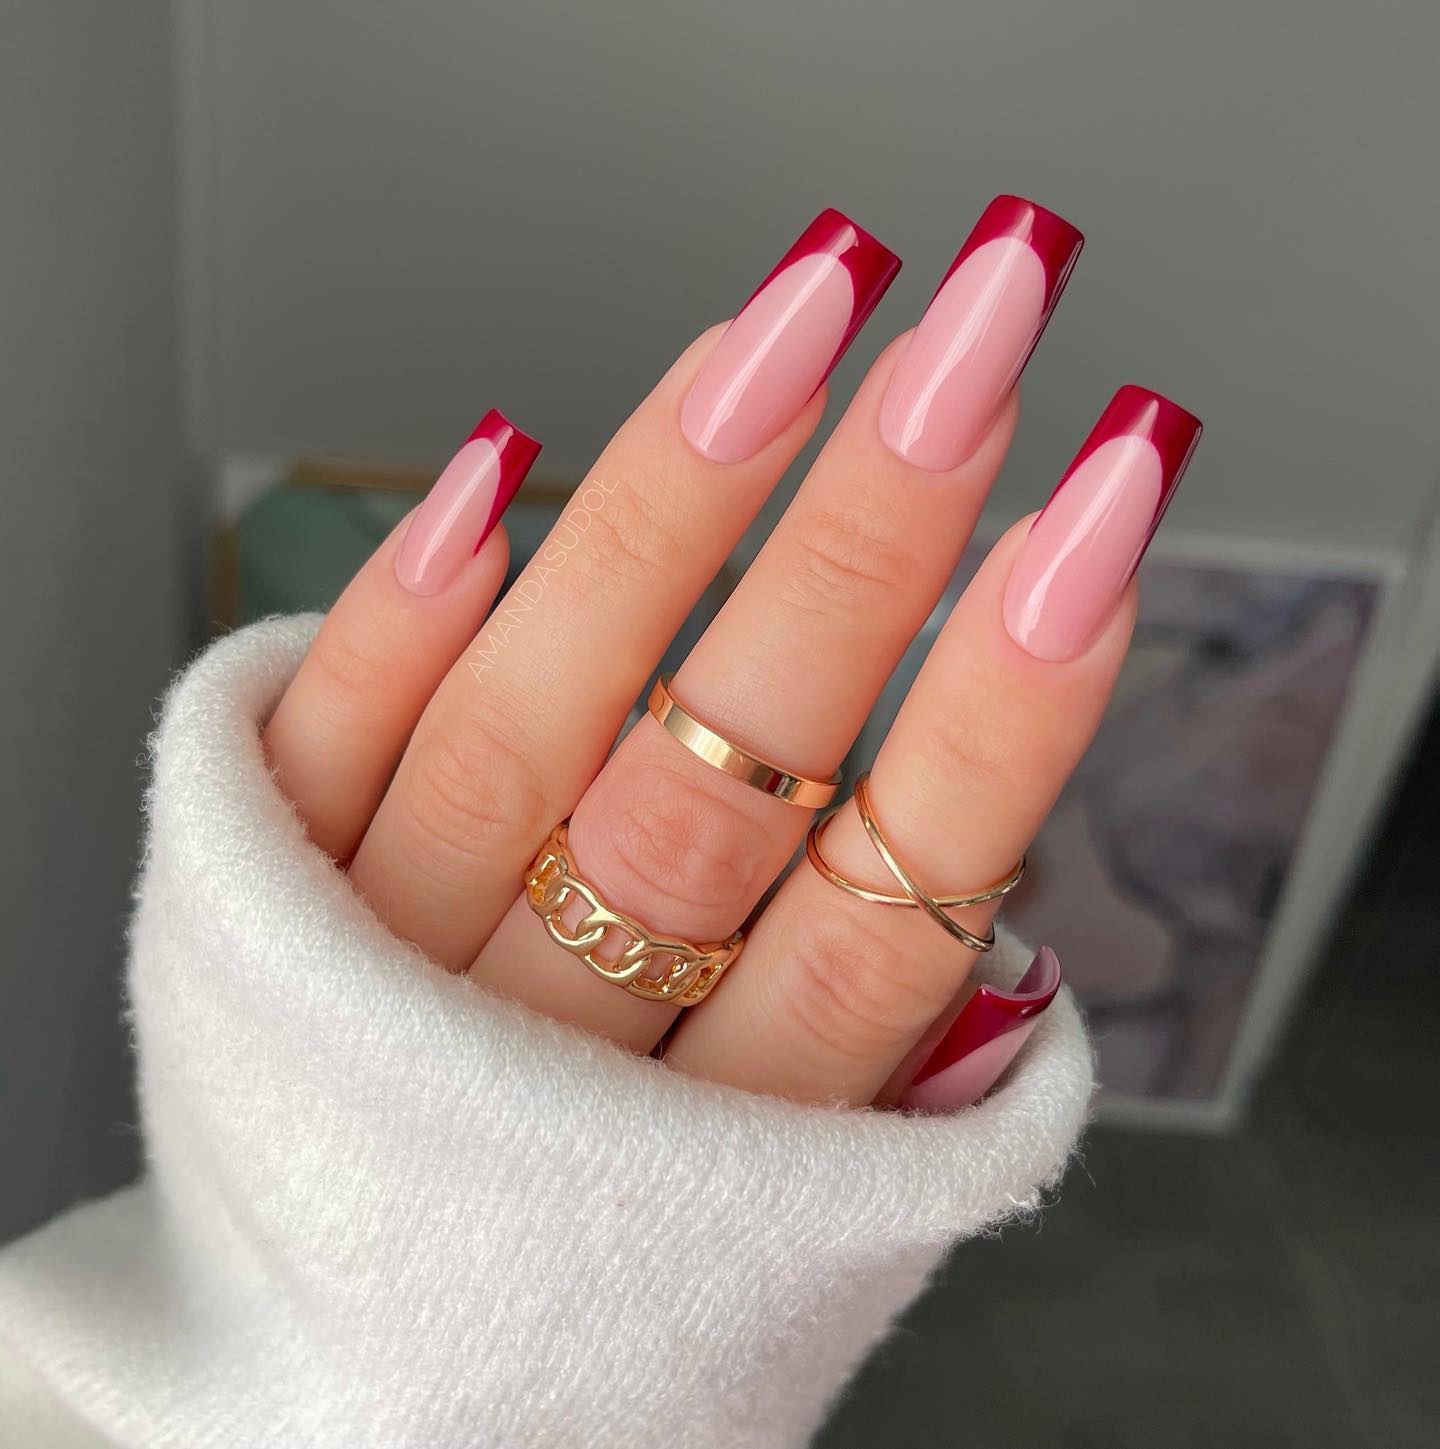 Long Square Burgundy French Nail Tips